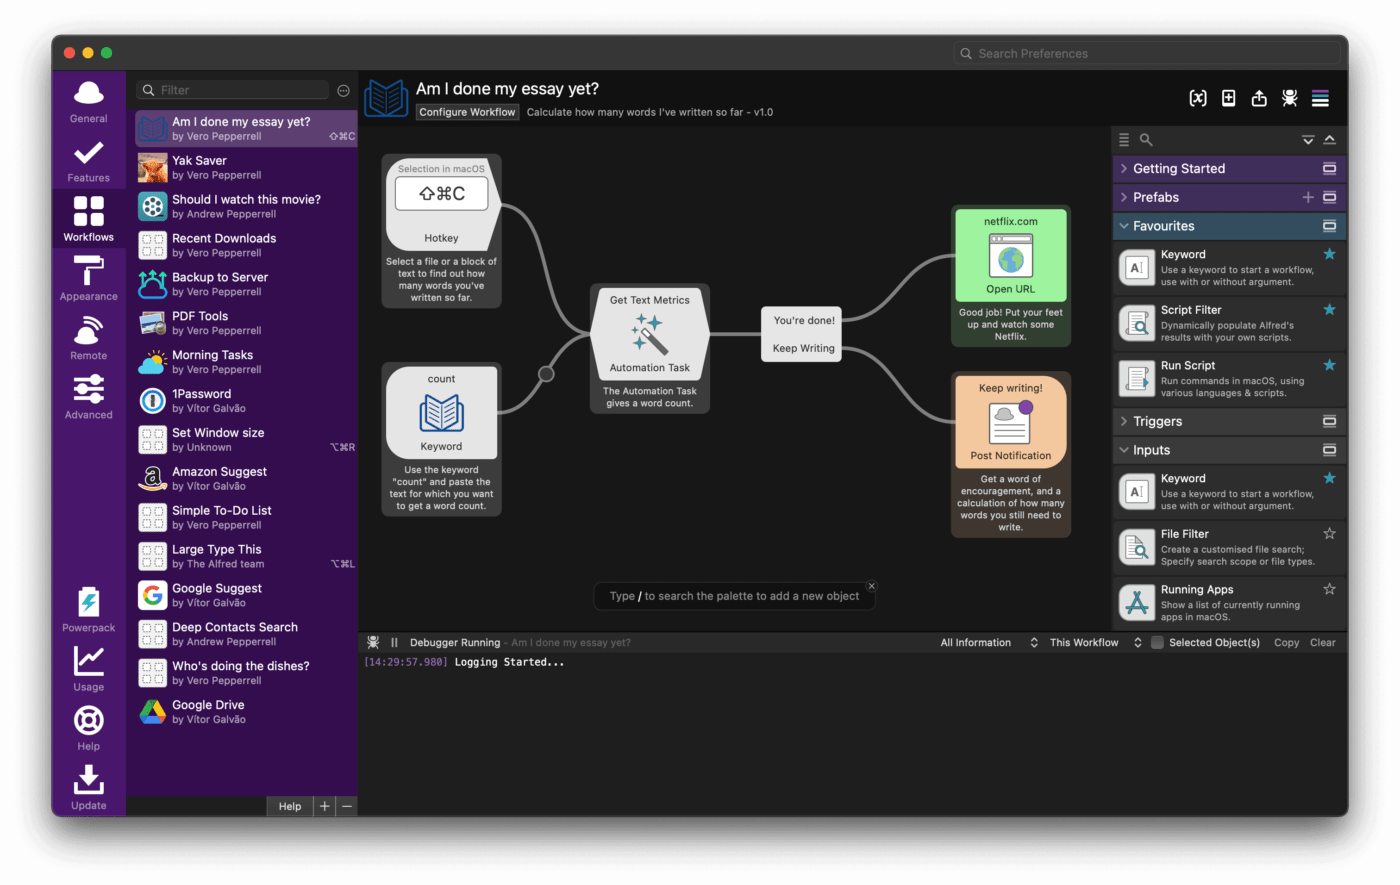 Alfred's dashboard showcases its prowess among leading productivity apps for Mac, offering a suite of tools for seamless workflows